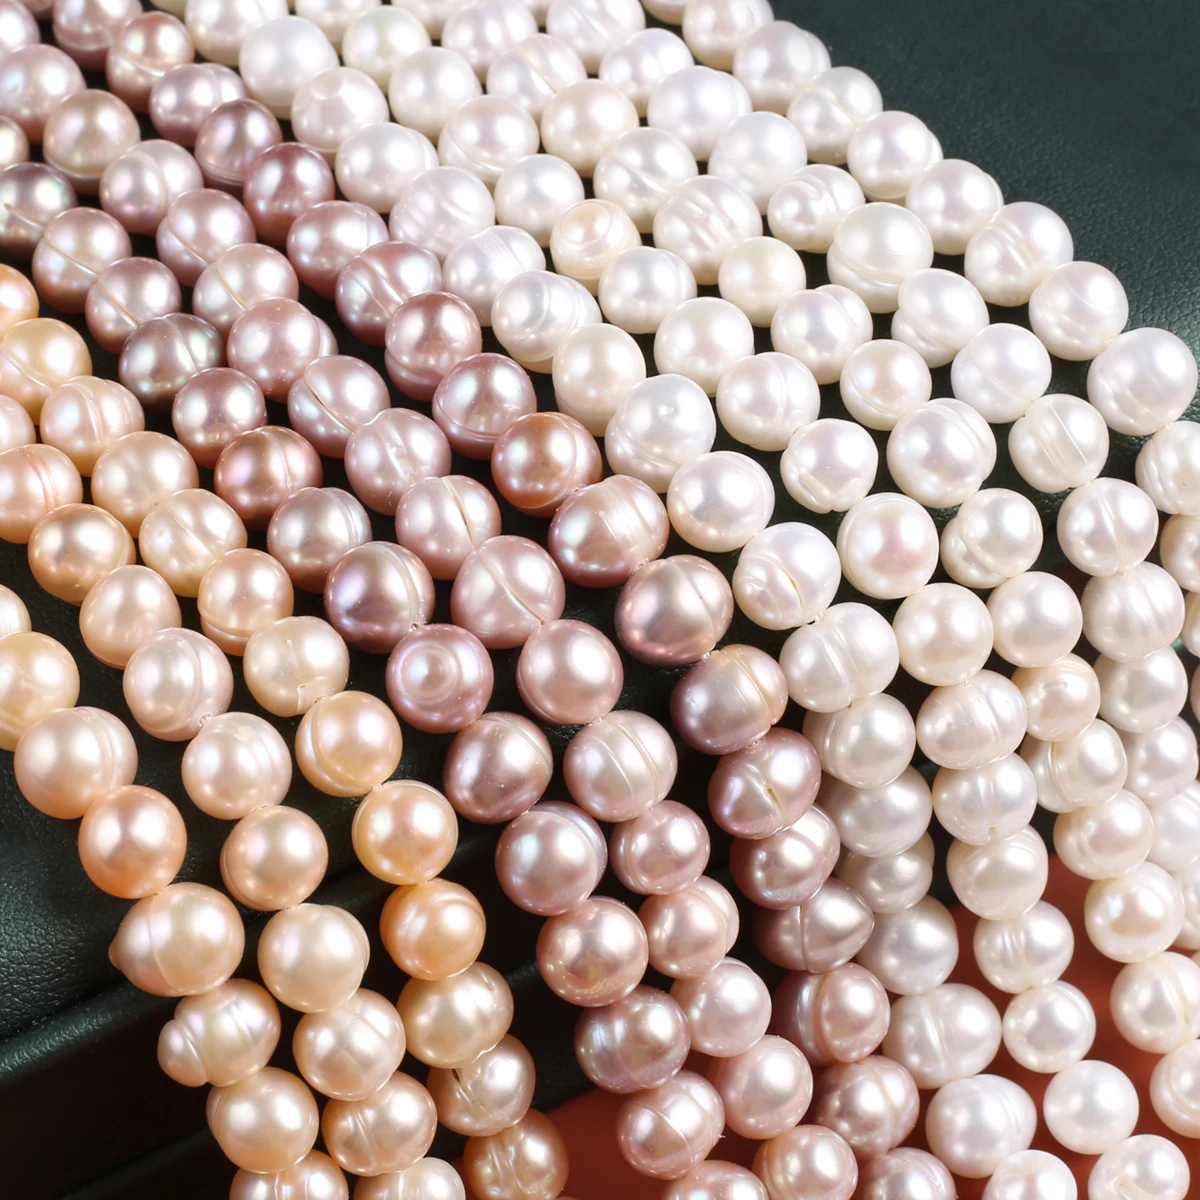 

Natural Pearl Punch Beads Exquisite Shape Elegant Appearance for DIY Jewelry Making Handmade Bracelet Necklace Length 36cm